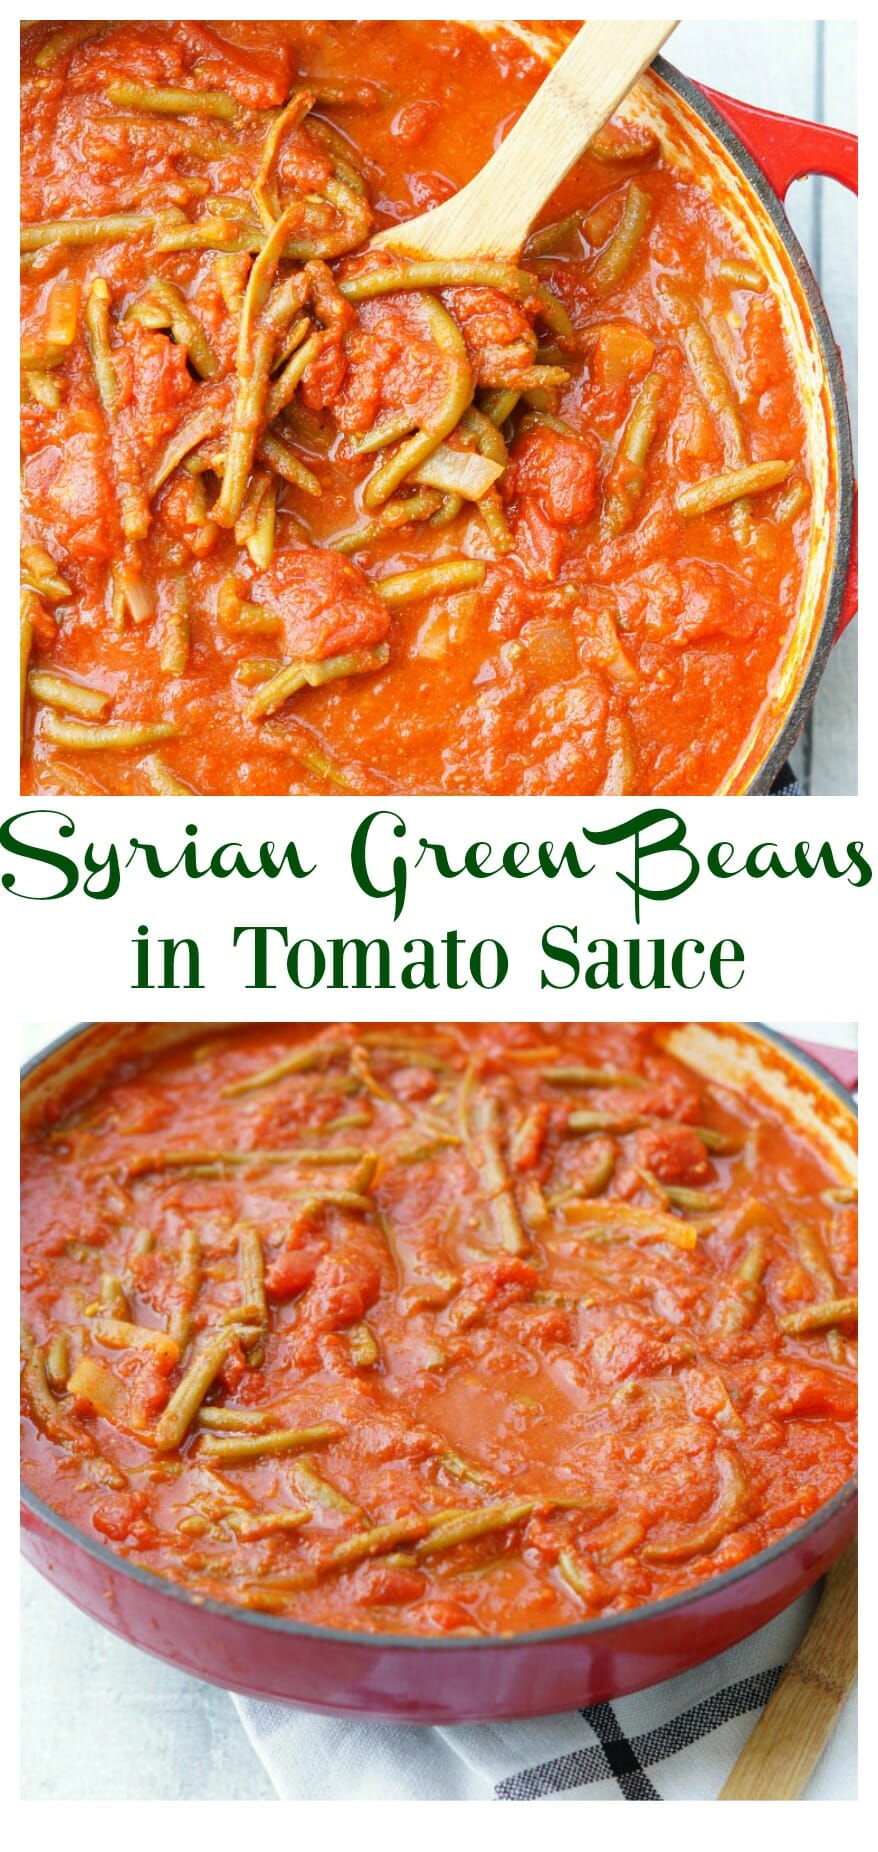 Lebanese Green Beans in Tomato Sauce is an amazing middle-eastern side dish recipe! Everyone loves these green beans in tomato sauce!